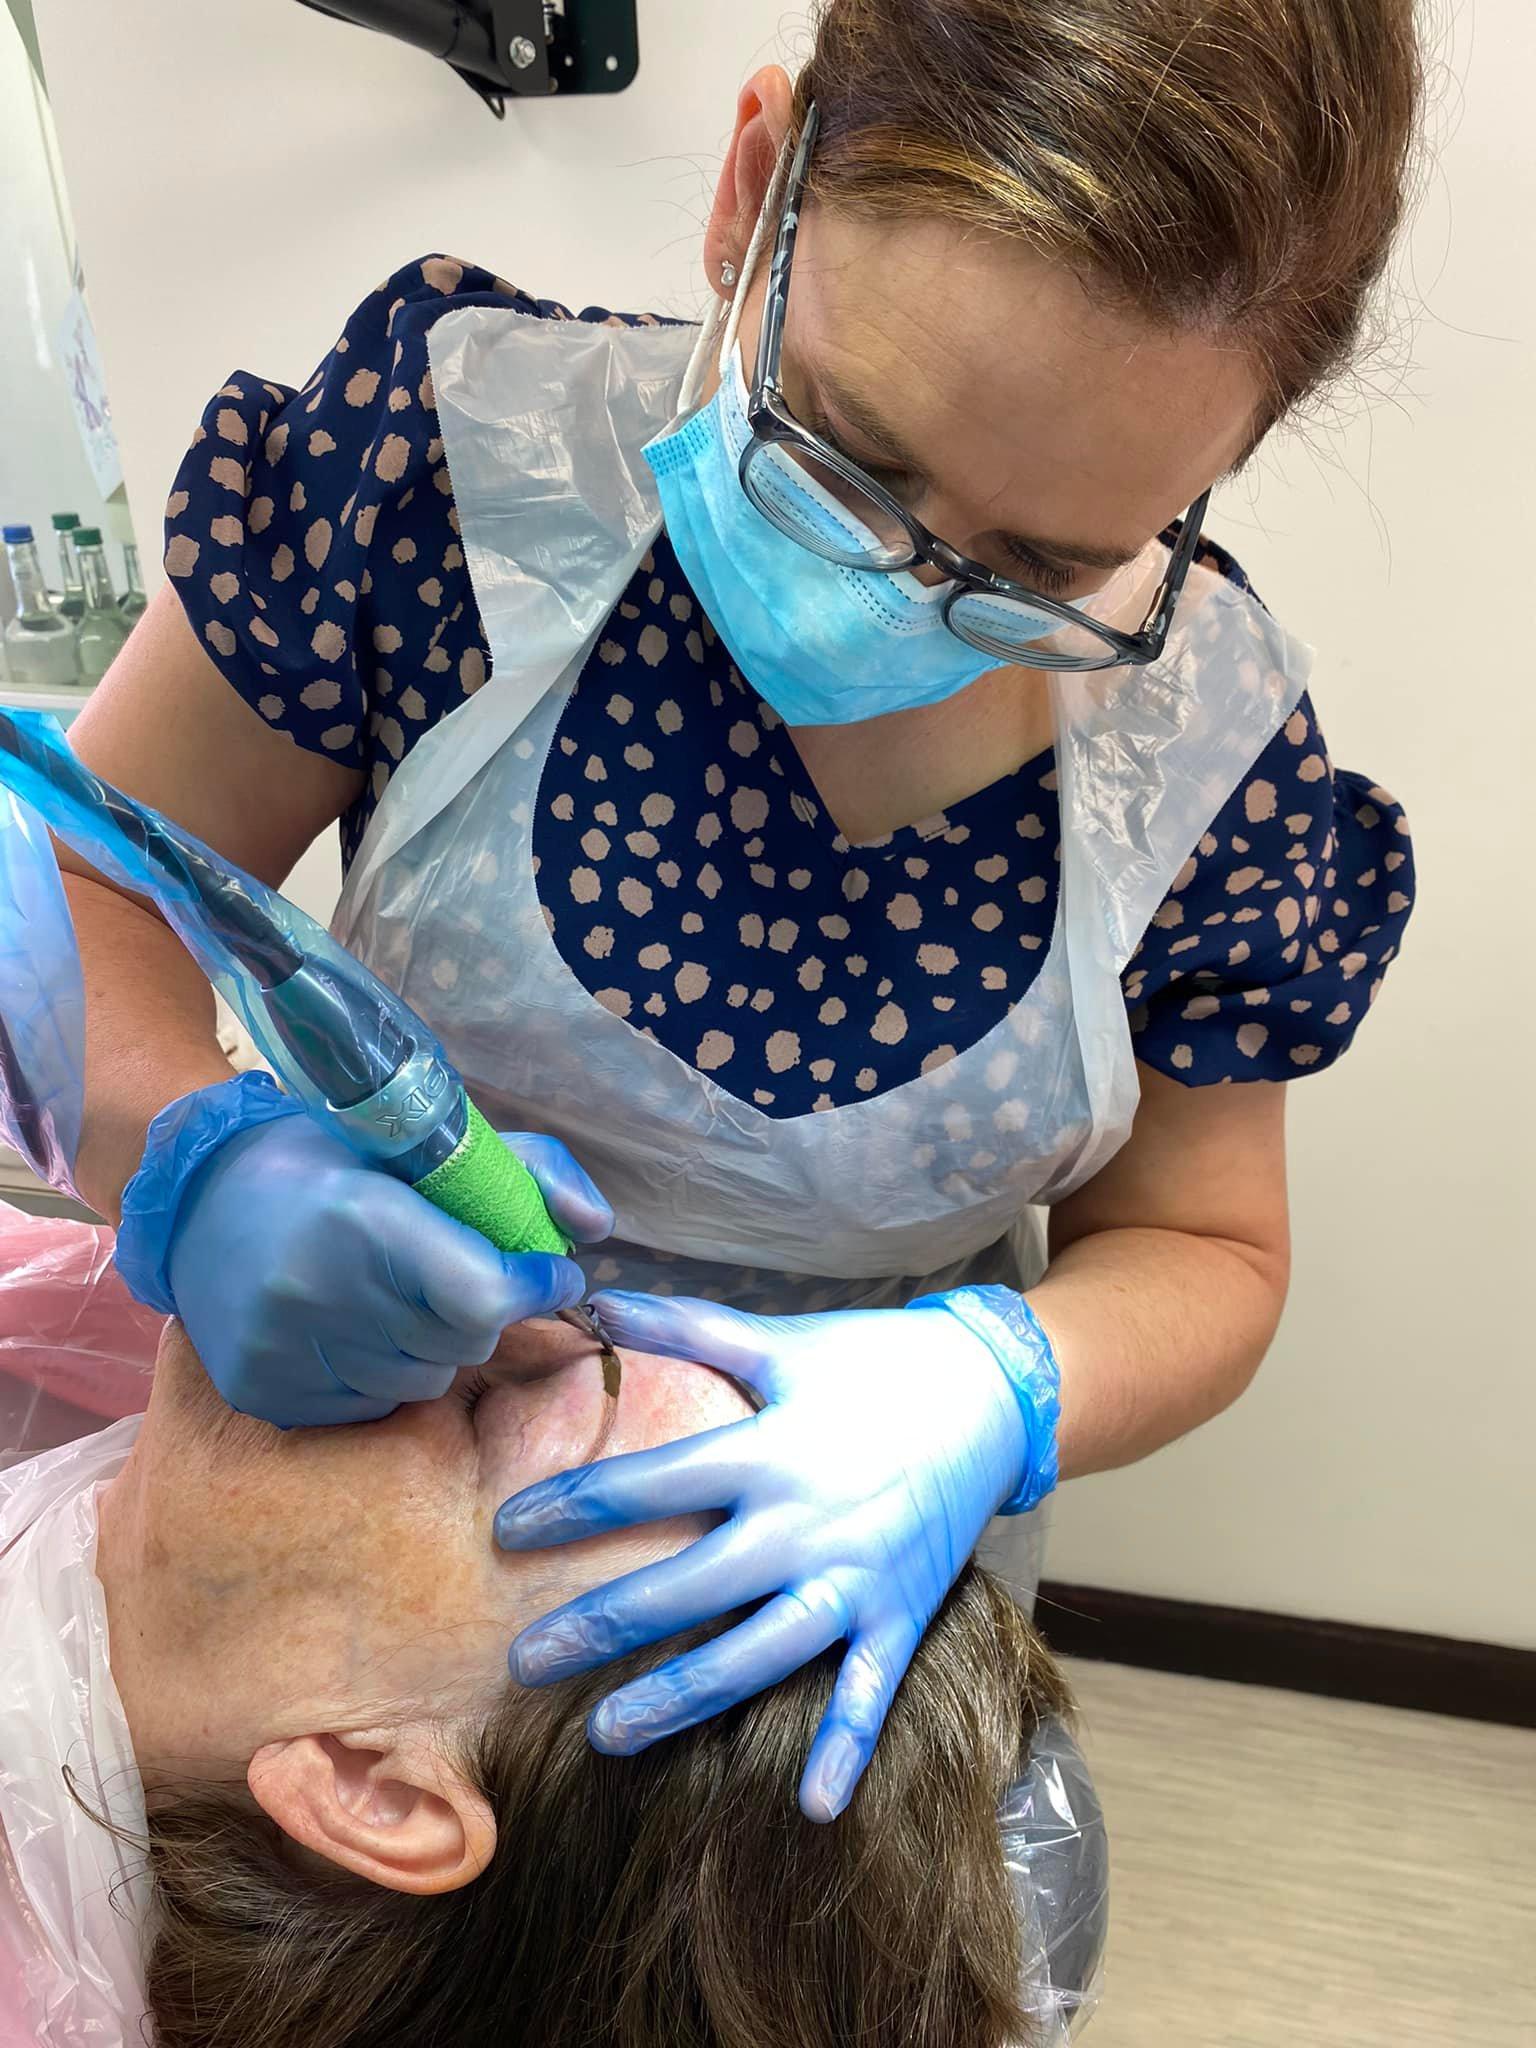 Alison performing permanent makeup on her client during training